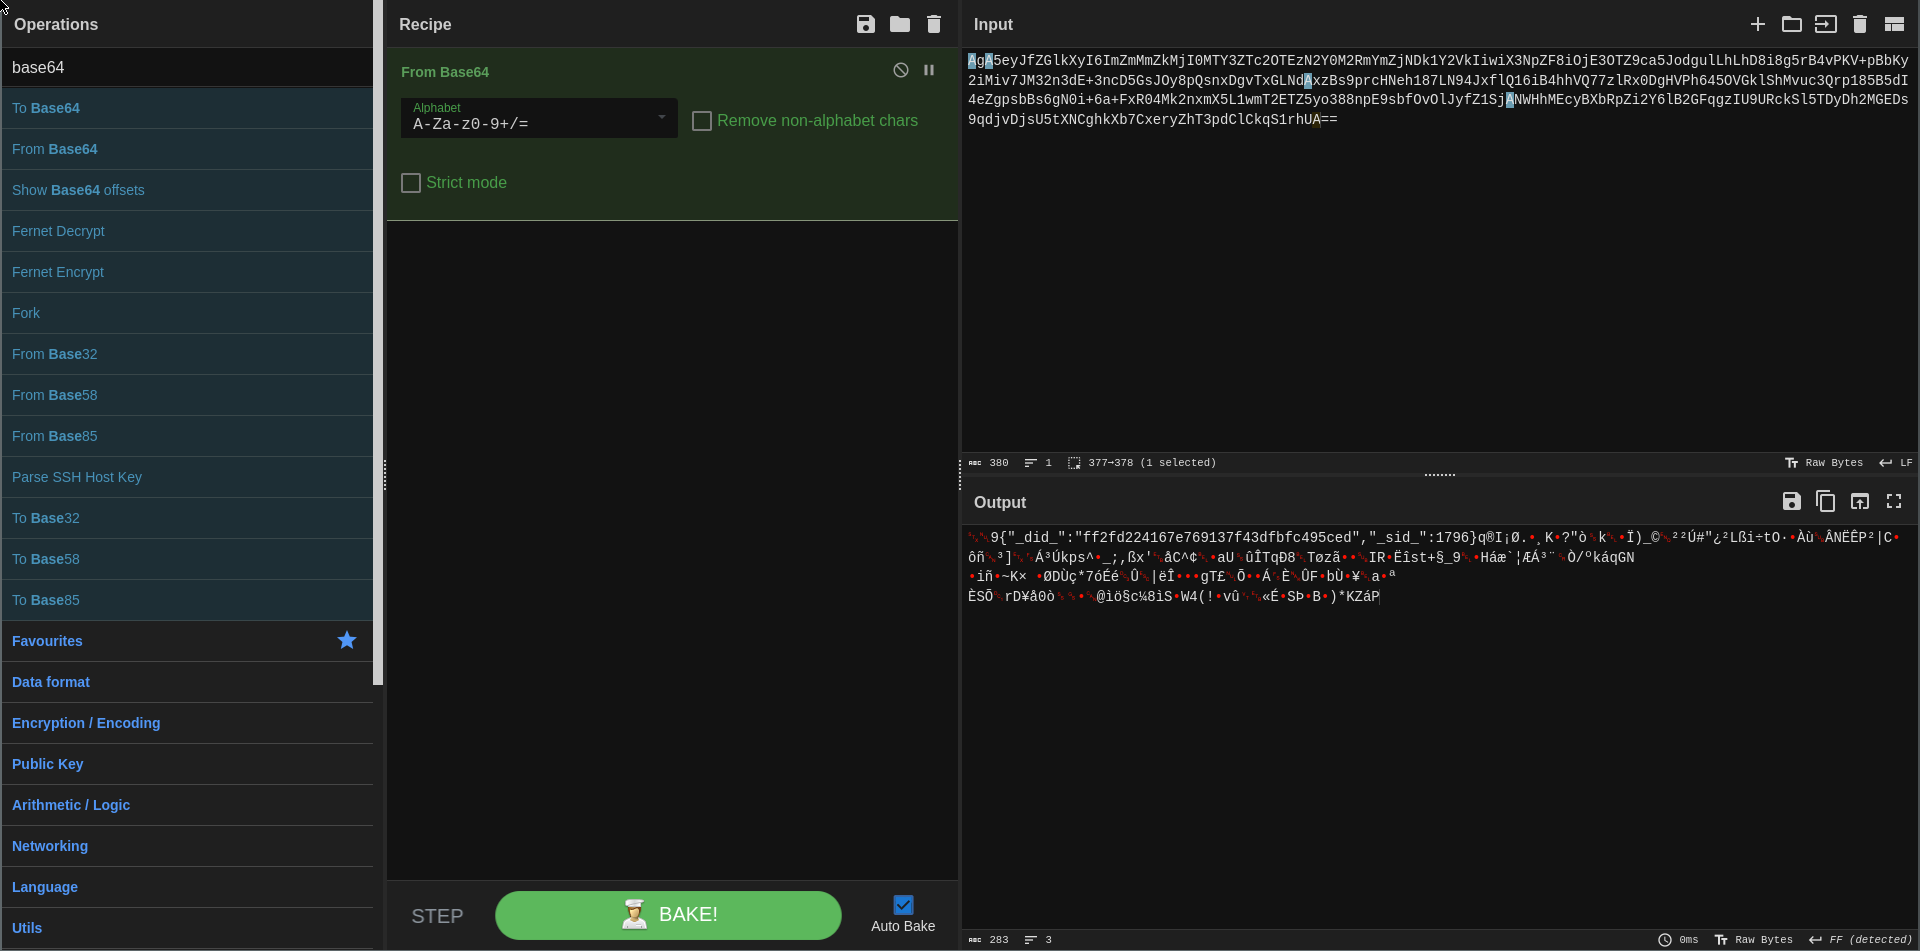 cyberchef ui with from base64 tool showing binary output that includes a section of readable text at the start